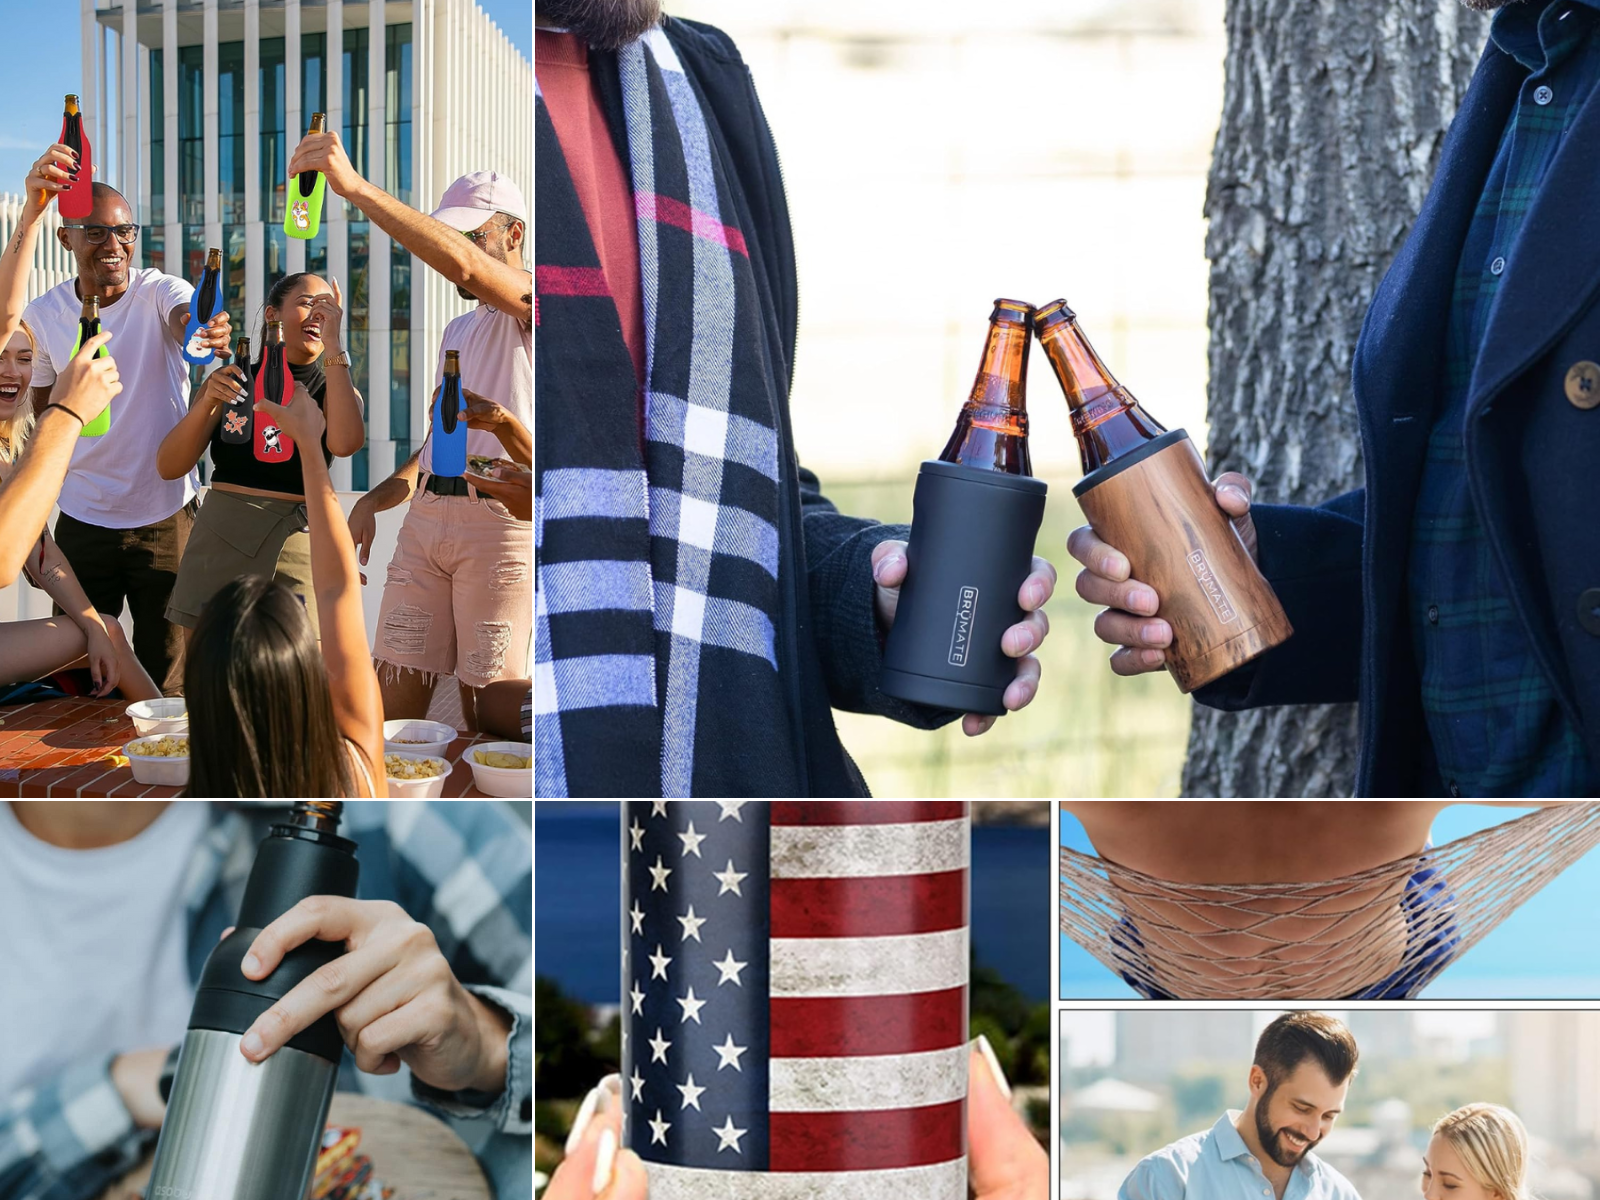 A stainless bottle/can koozie, an American flag koozie, a party with neoprene koozies, and a wood look koozie.